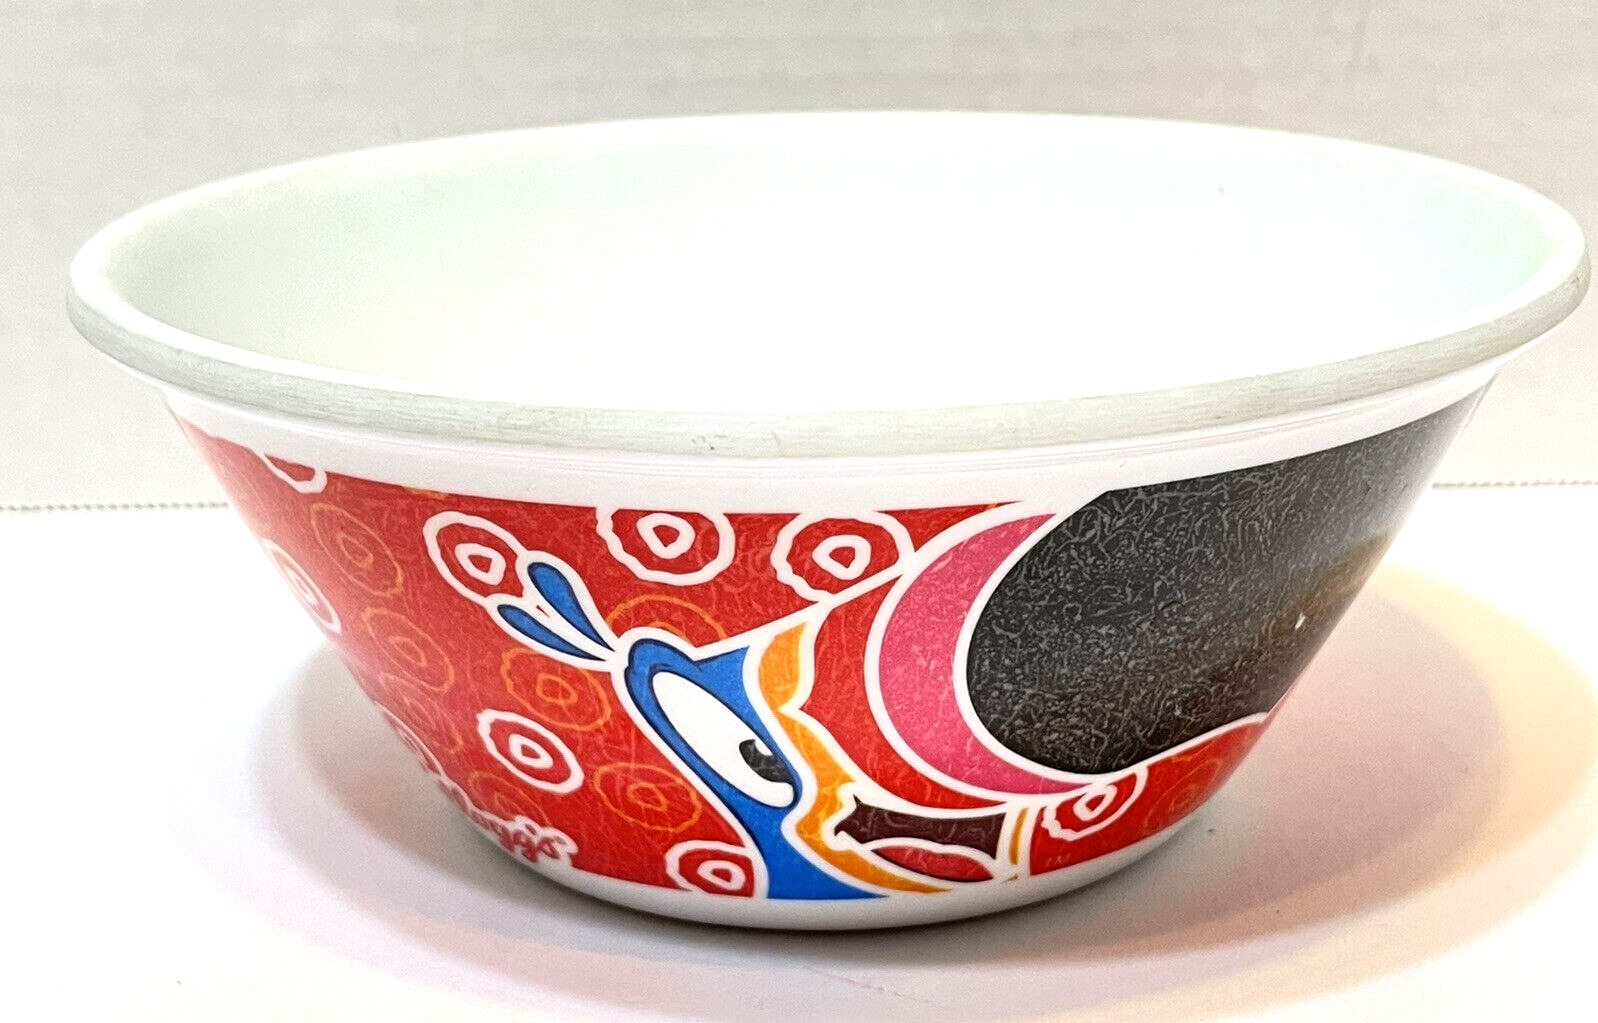 Primary image for Kelloggs Cereal Bowl 6.75" Round Fruit Loops Toucan Sam Plastic Melamine 2015